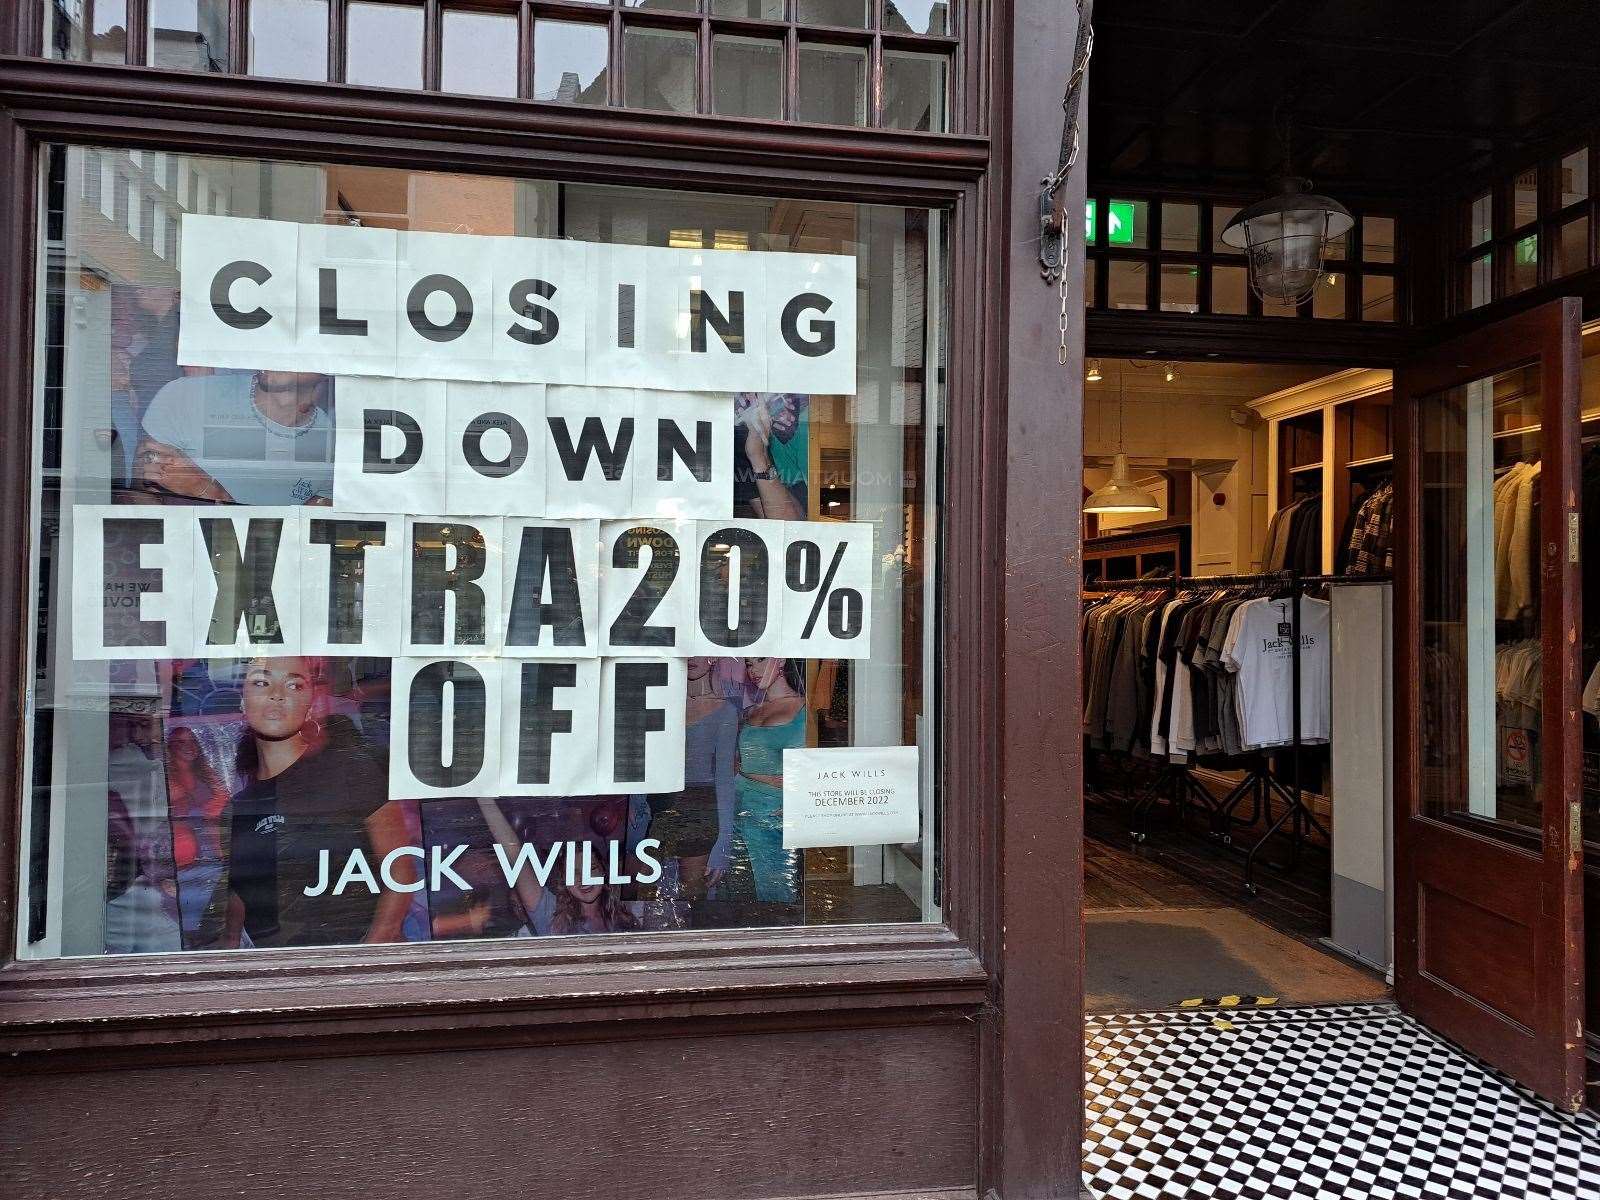 A closing down sale is on during November and December